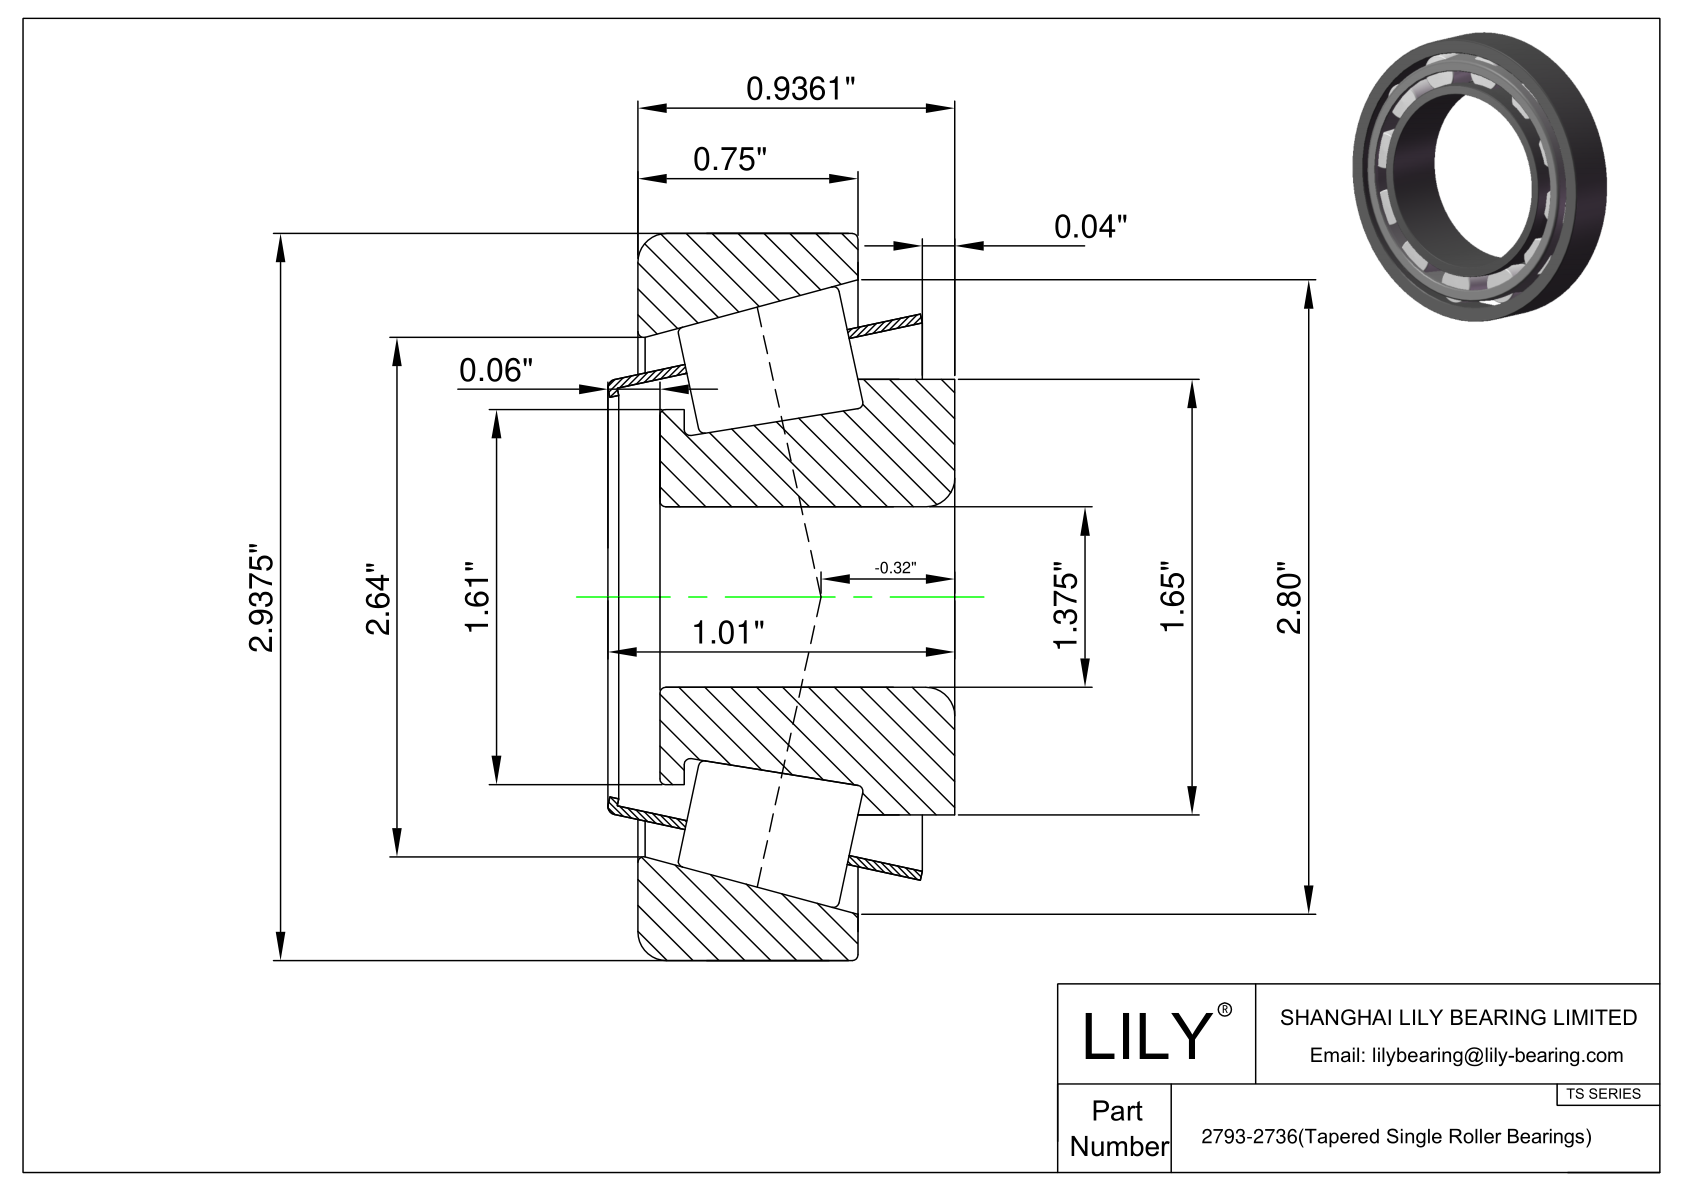 2793-2736 TS (Tapered Single Roller Bearings) (Imperial) cad drawing